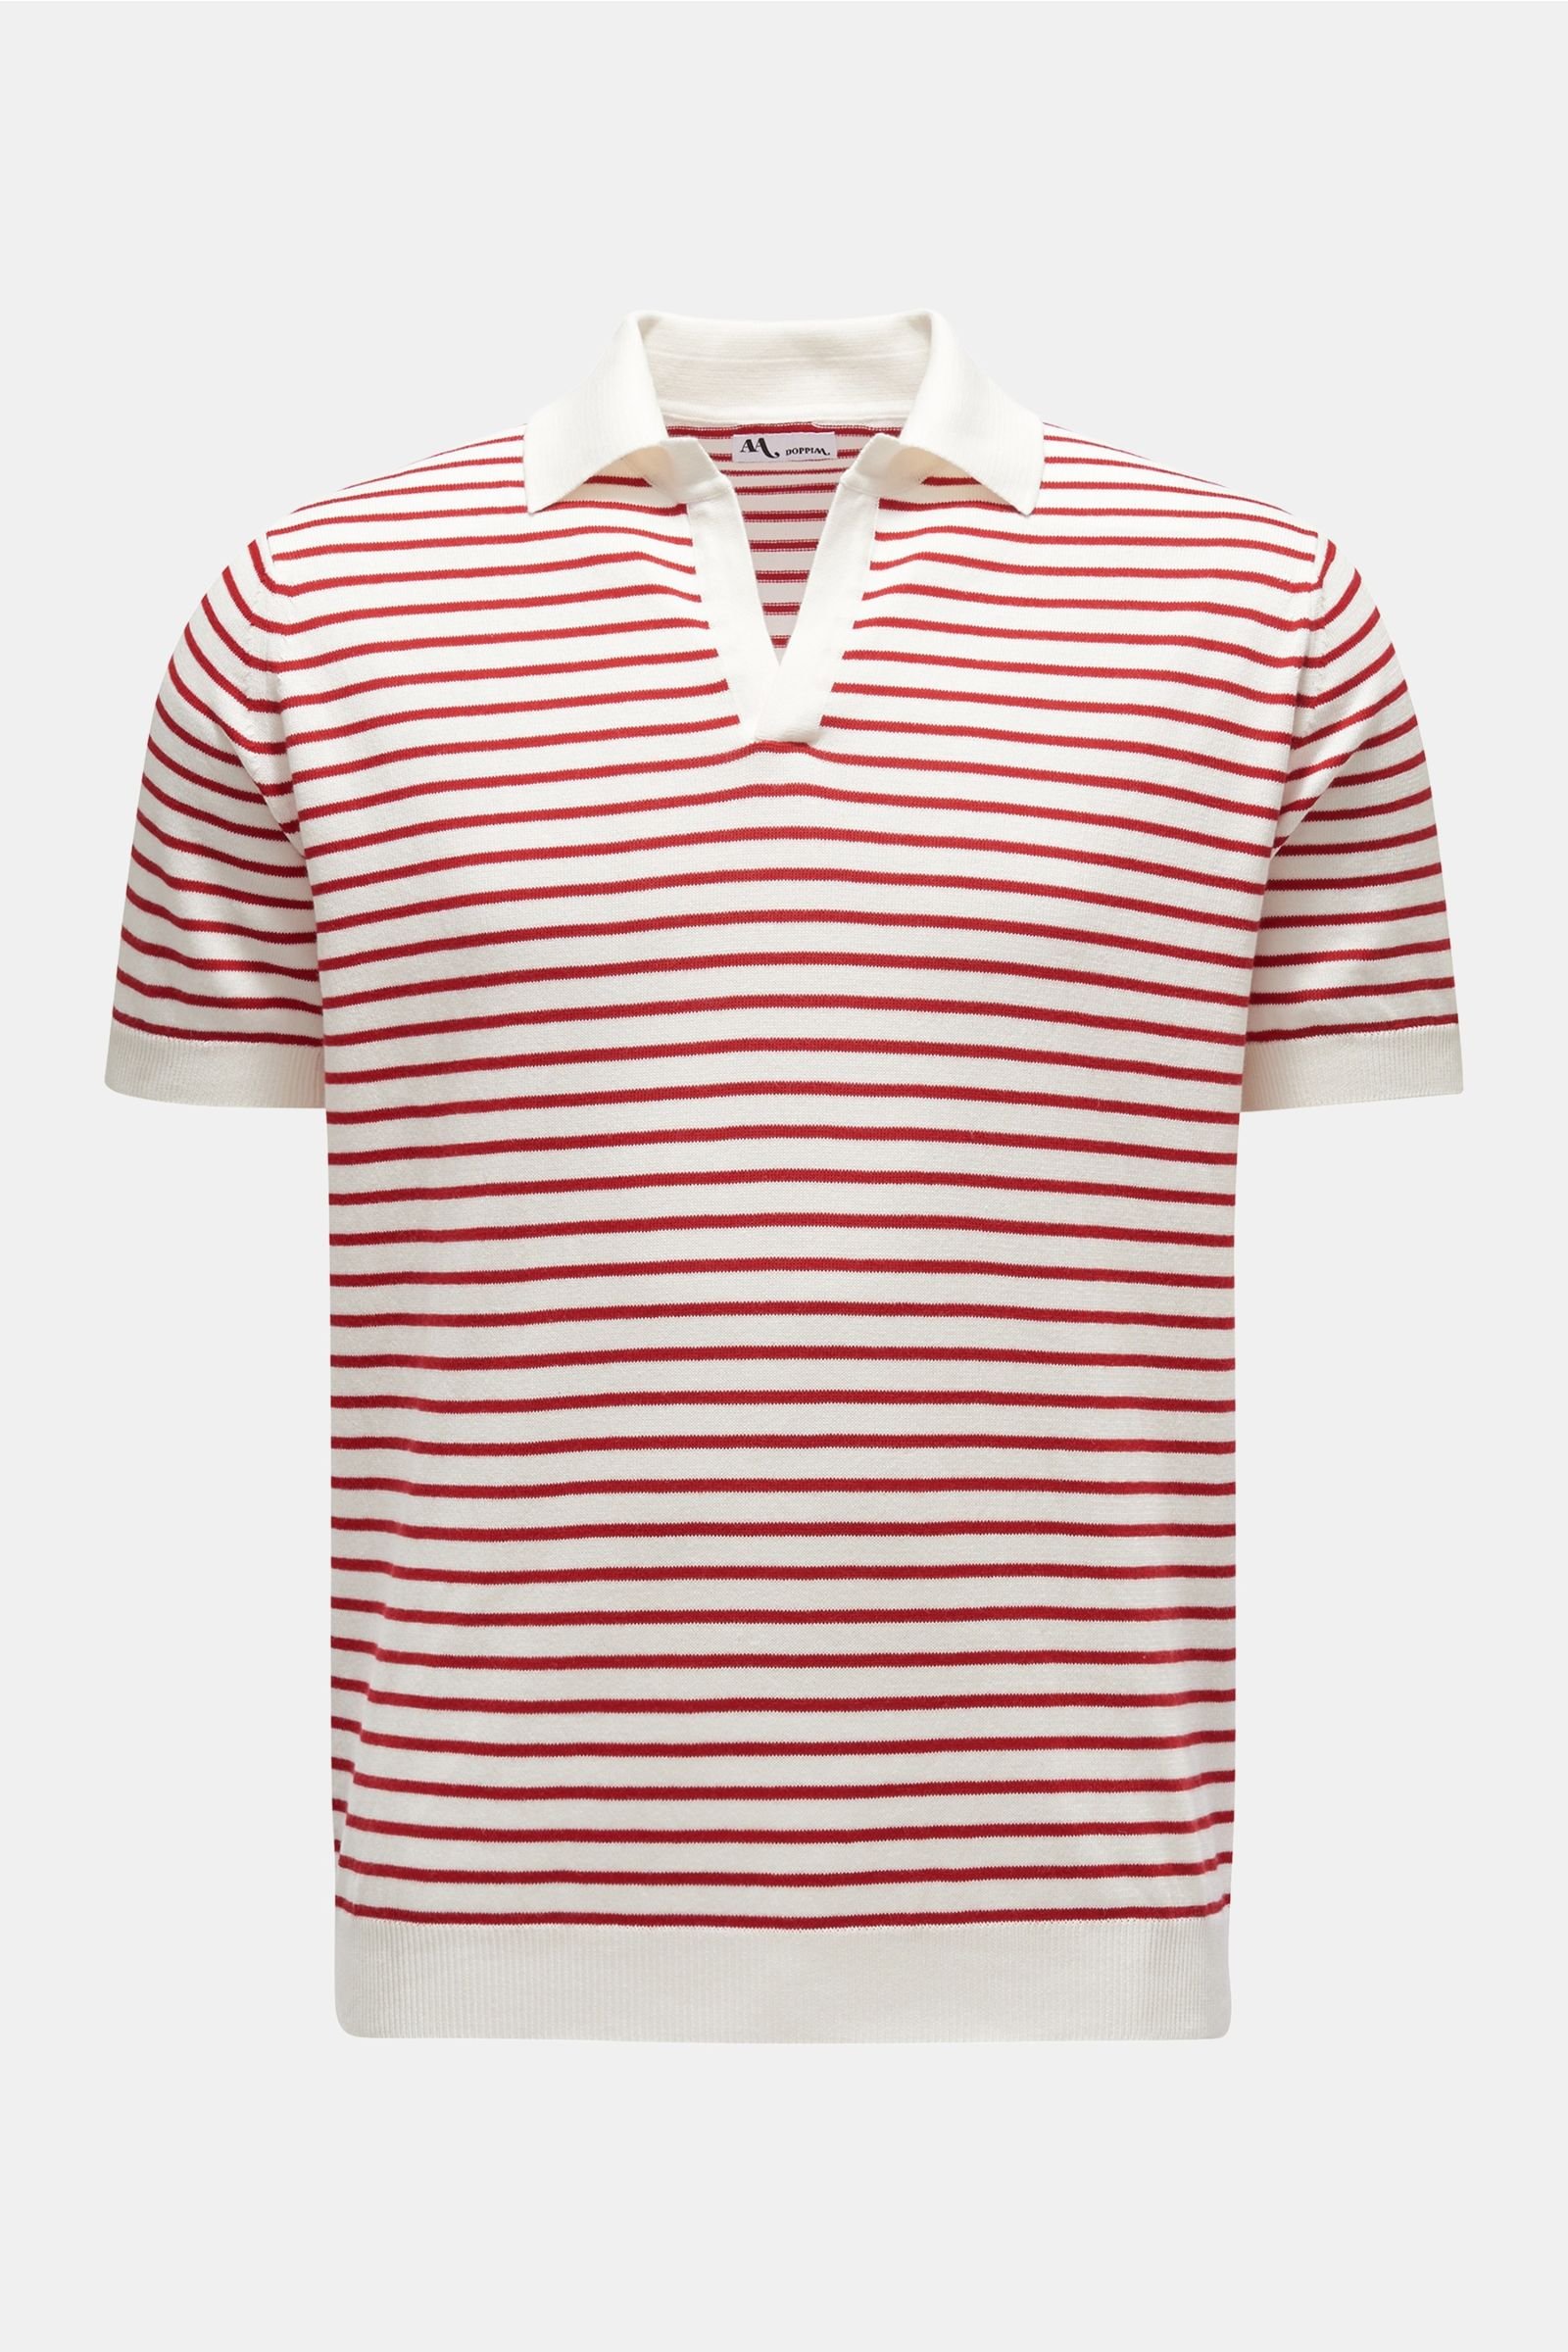 Short sleeve knit polo 'Aavio' red/off-white striped